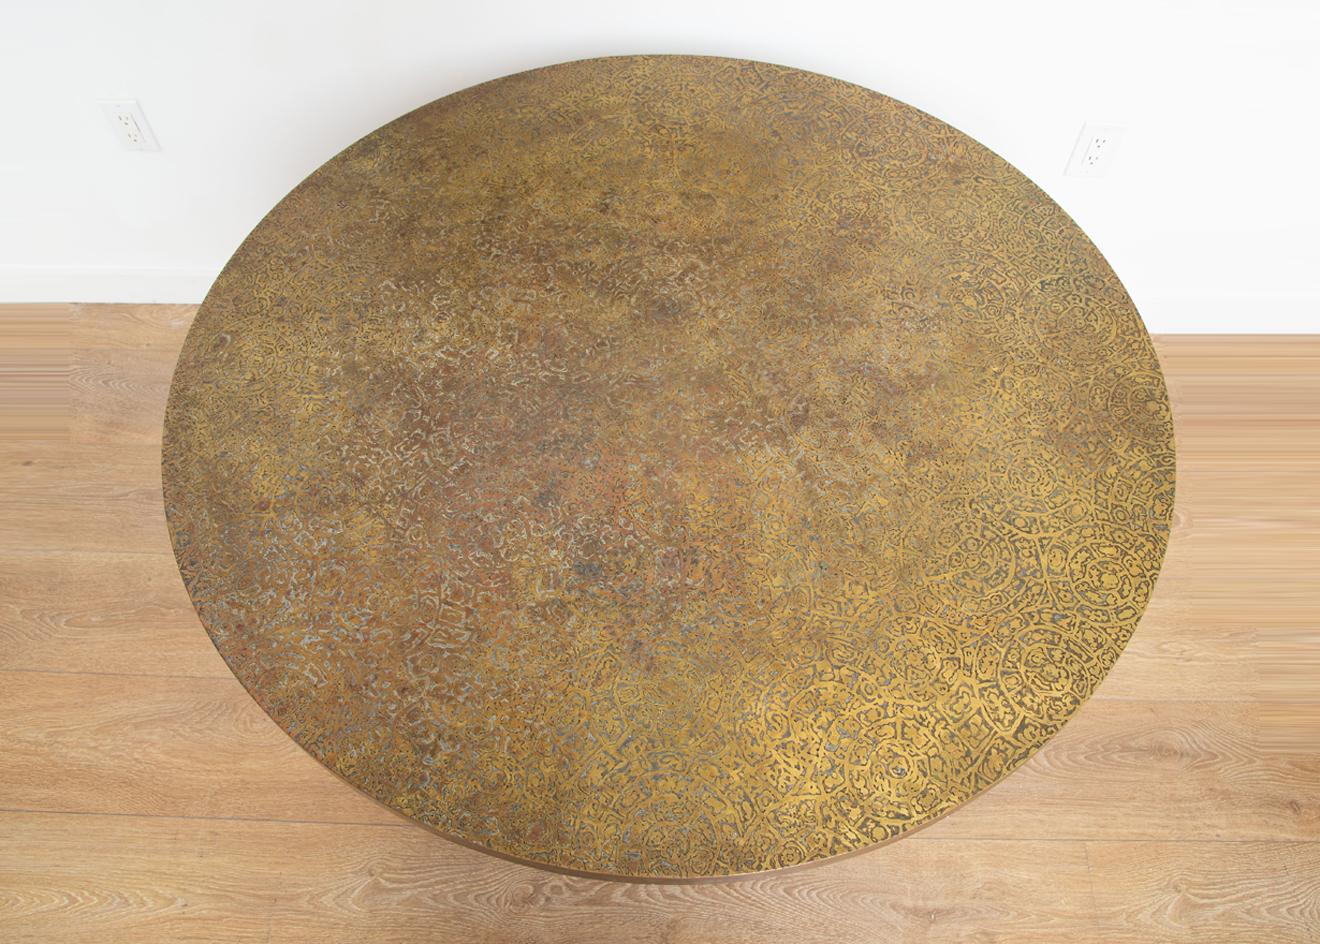 Philip and Kelvin LaVerne etruscan coffee table, New York, circa 1960's,
Etched, patinated and polychromed bronze and pewter,
Good collector's condition
Available to view in-situ in our Miami showroom.